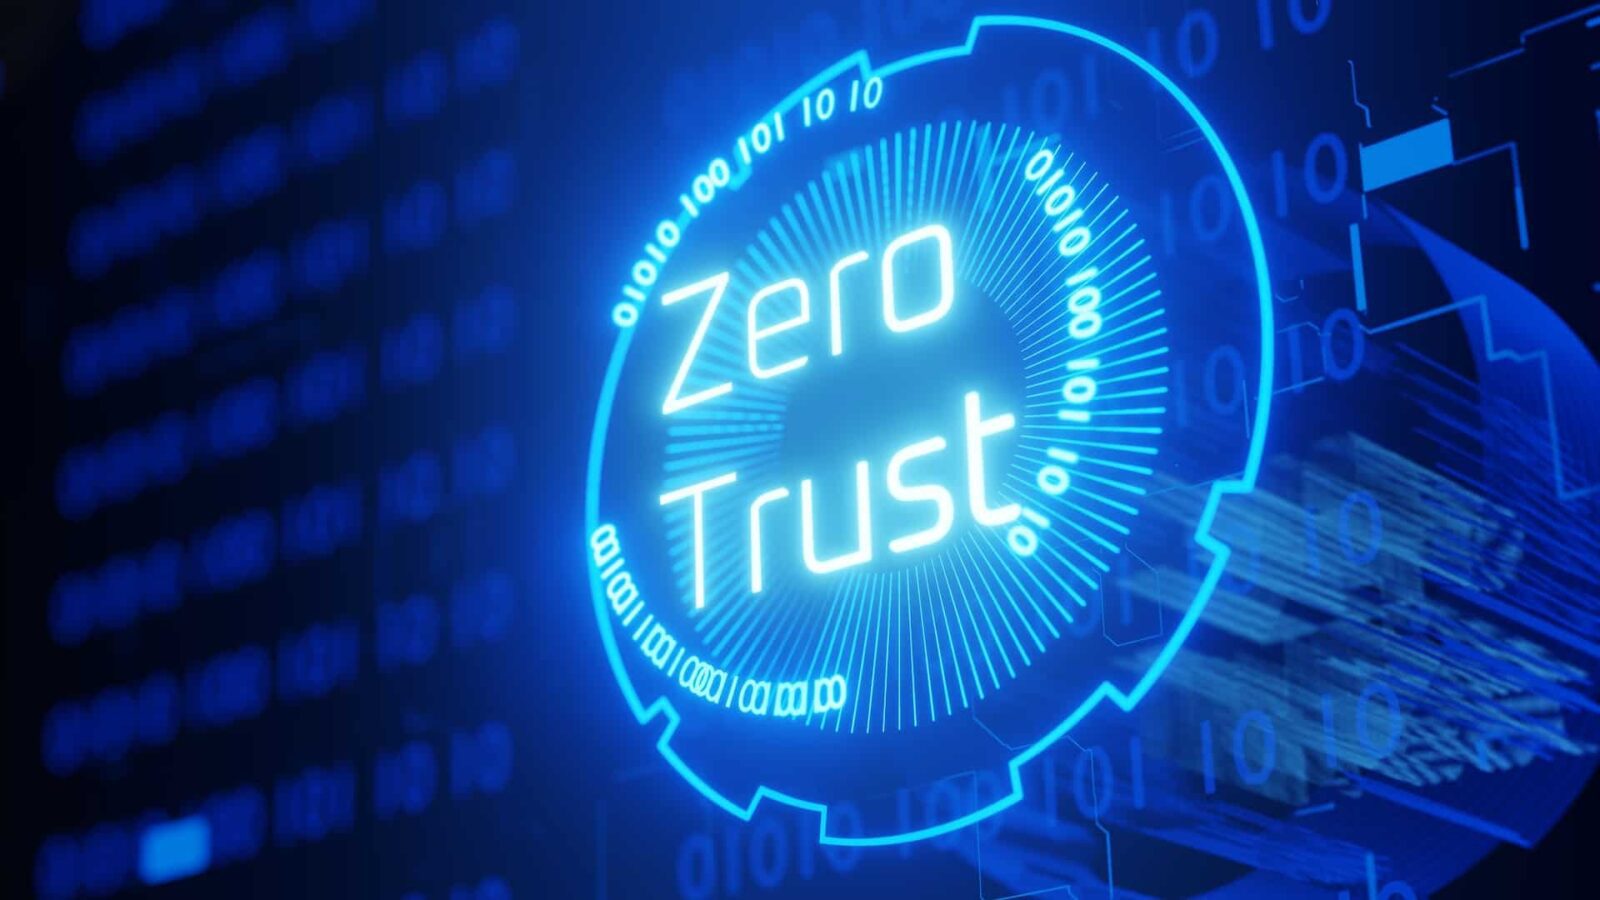 Zero Trust: solution for detecting, responding to and recovering from breaches